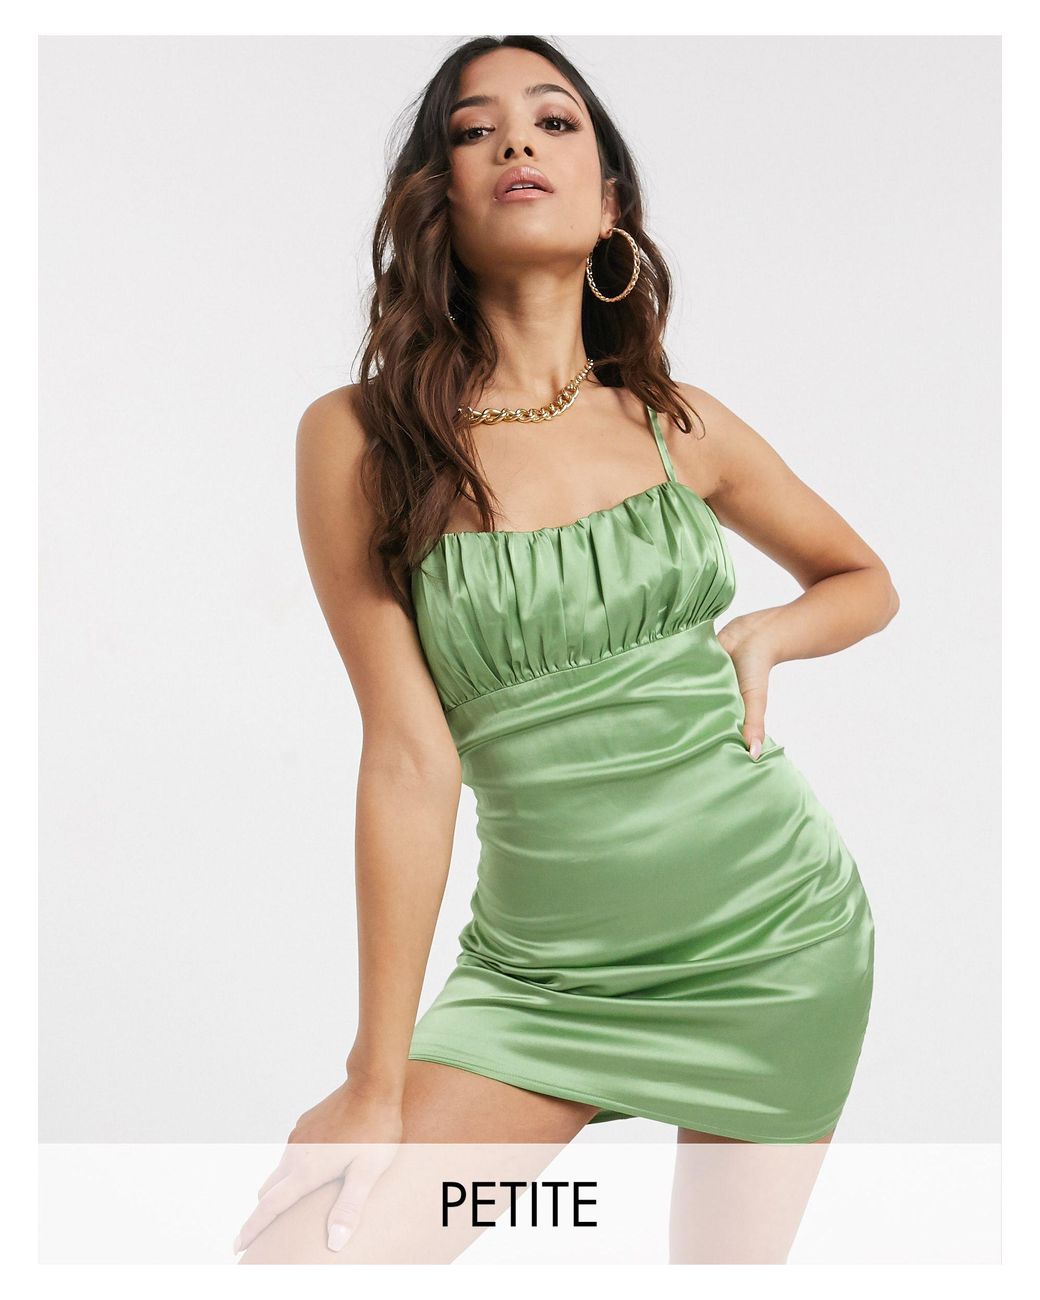 missguided dresses